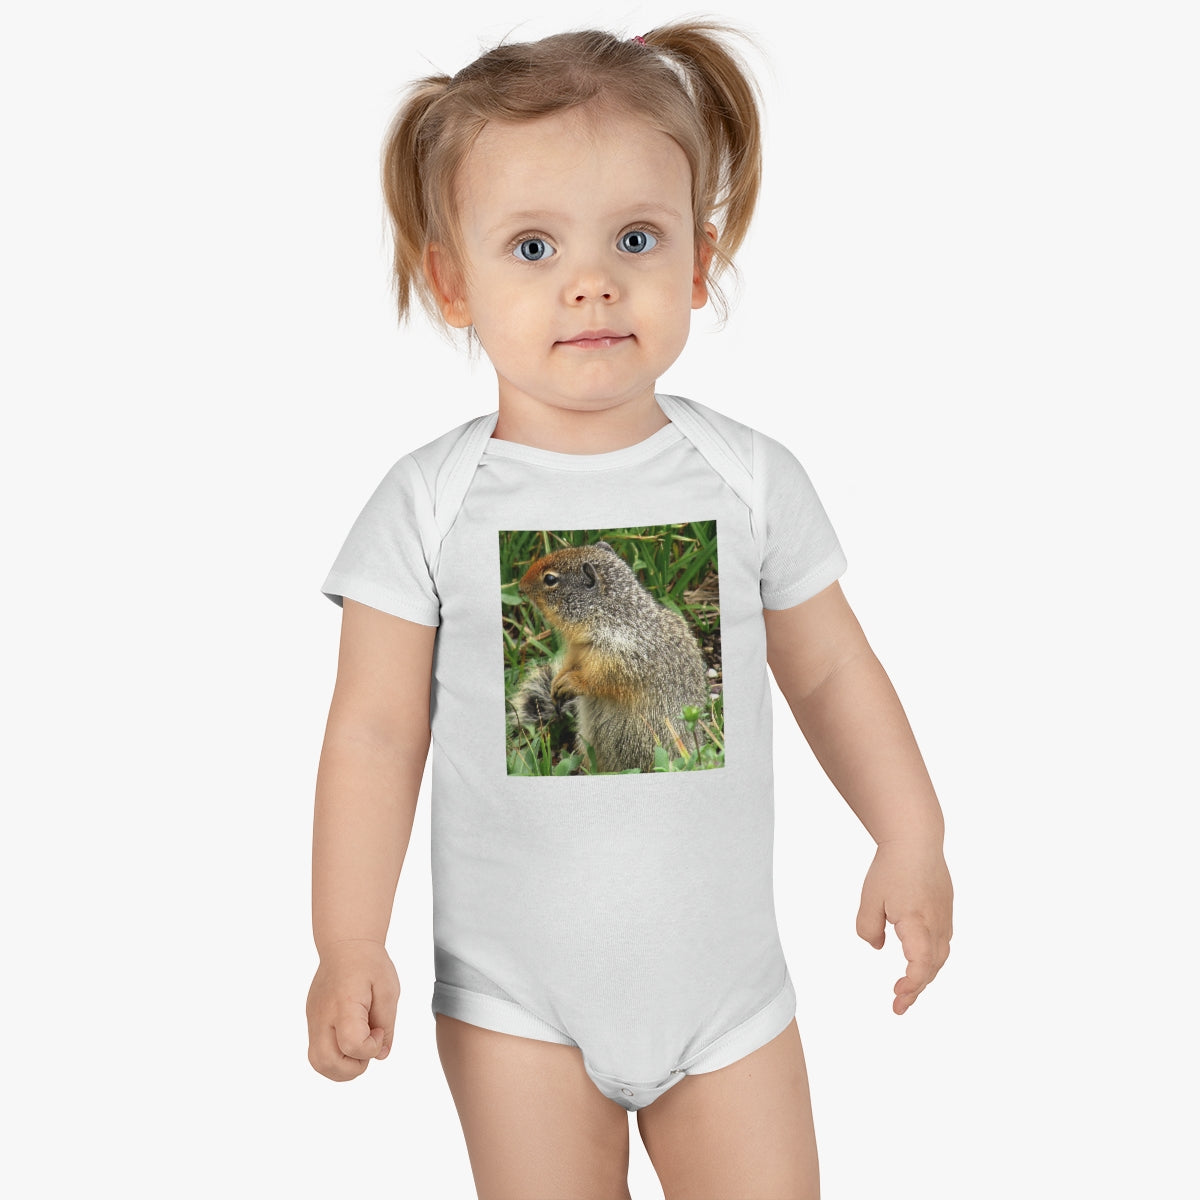 Inquisitive Stare - Baby Short Sleeve Onesie - Fry1Productions